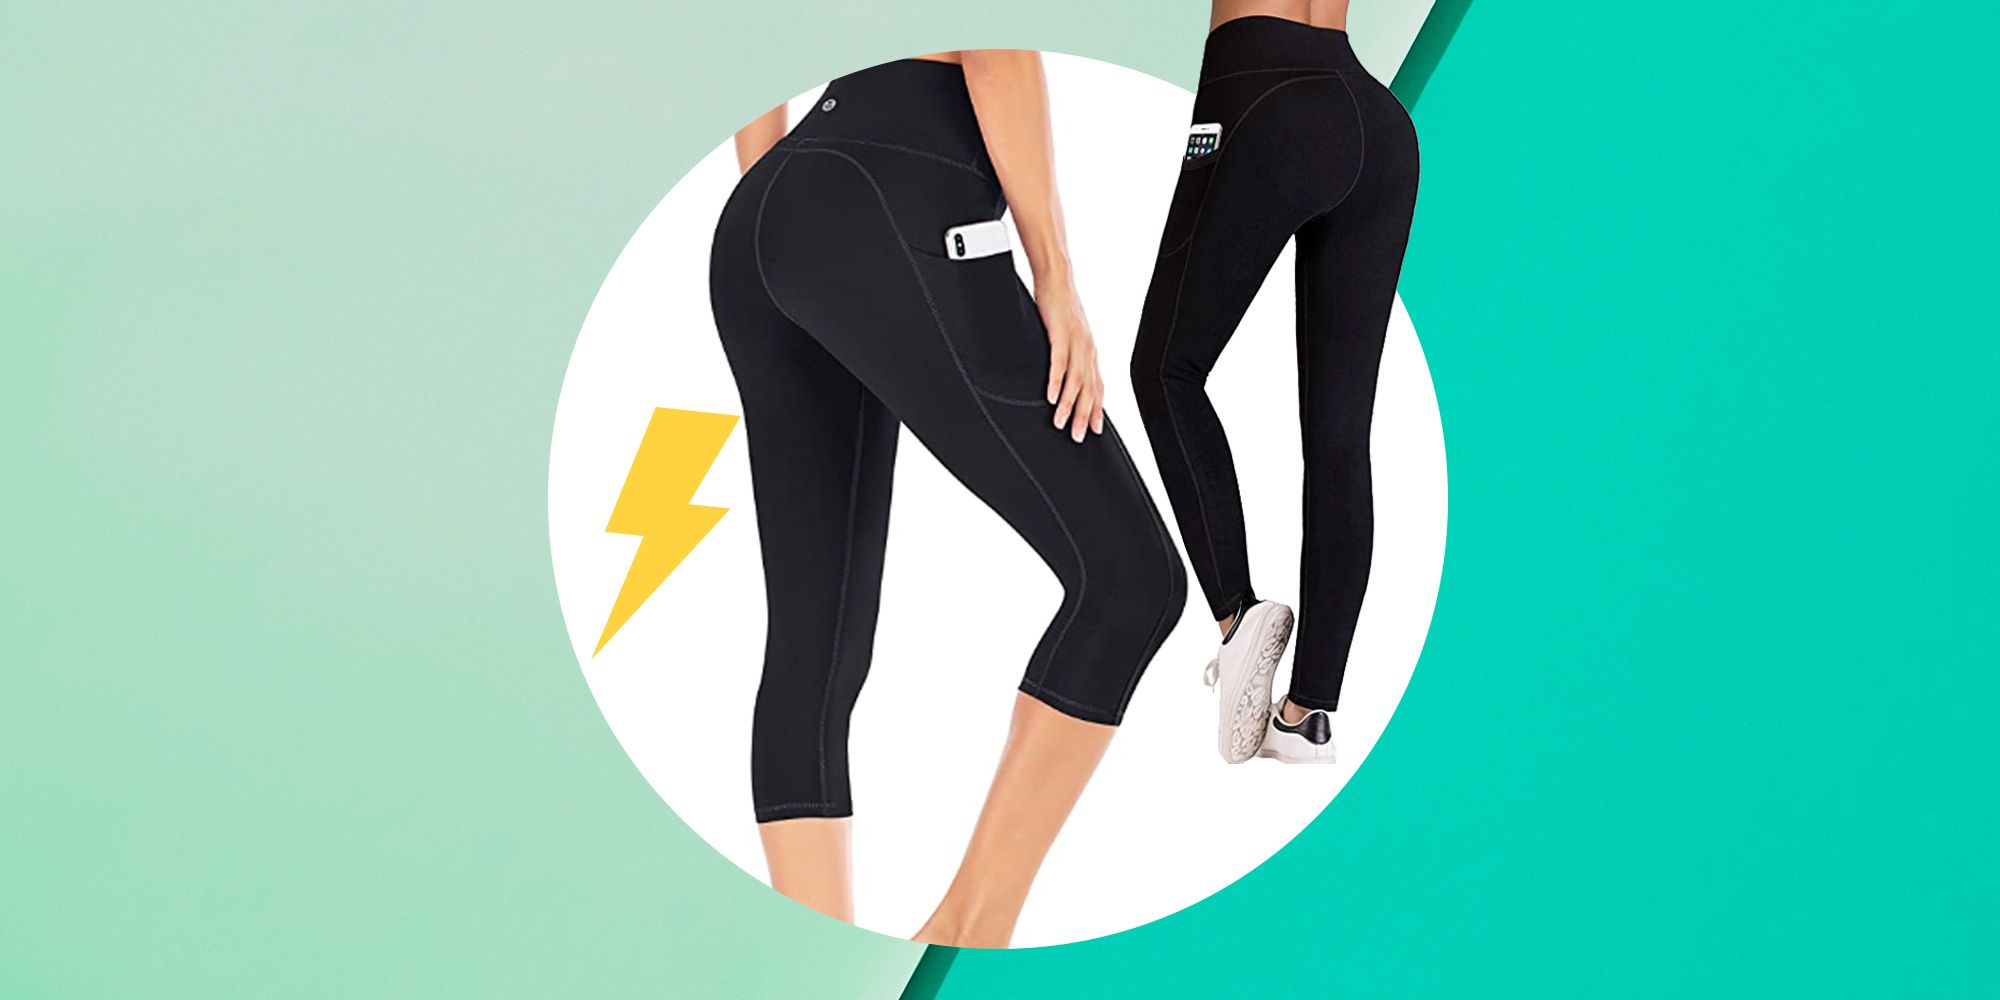 MS GALLERY-BEST PRICE Black Leggings for Girls and Women with side stone